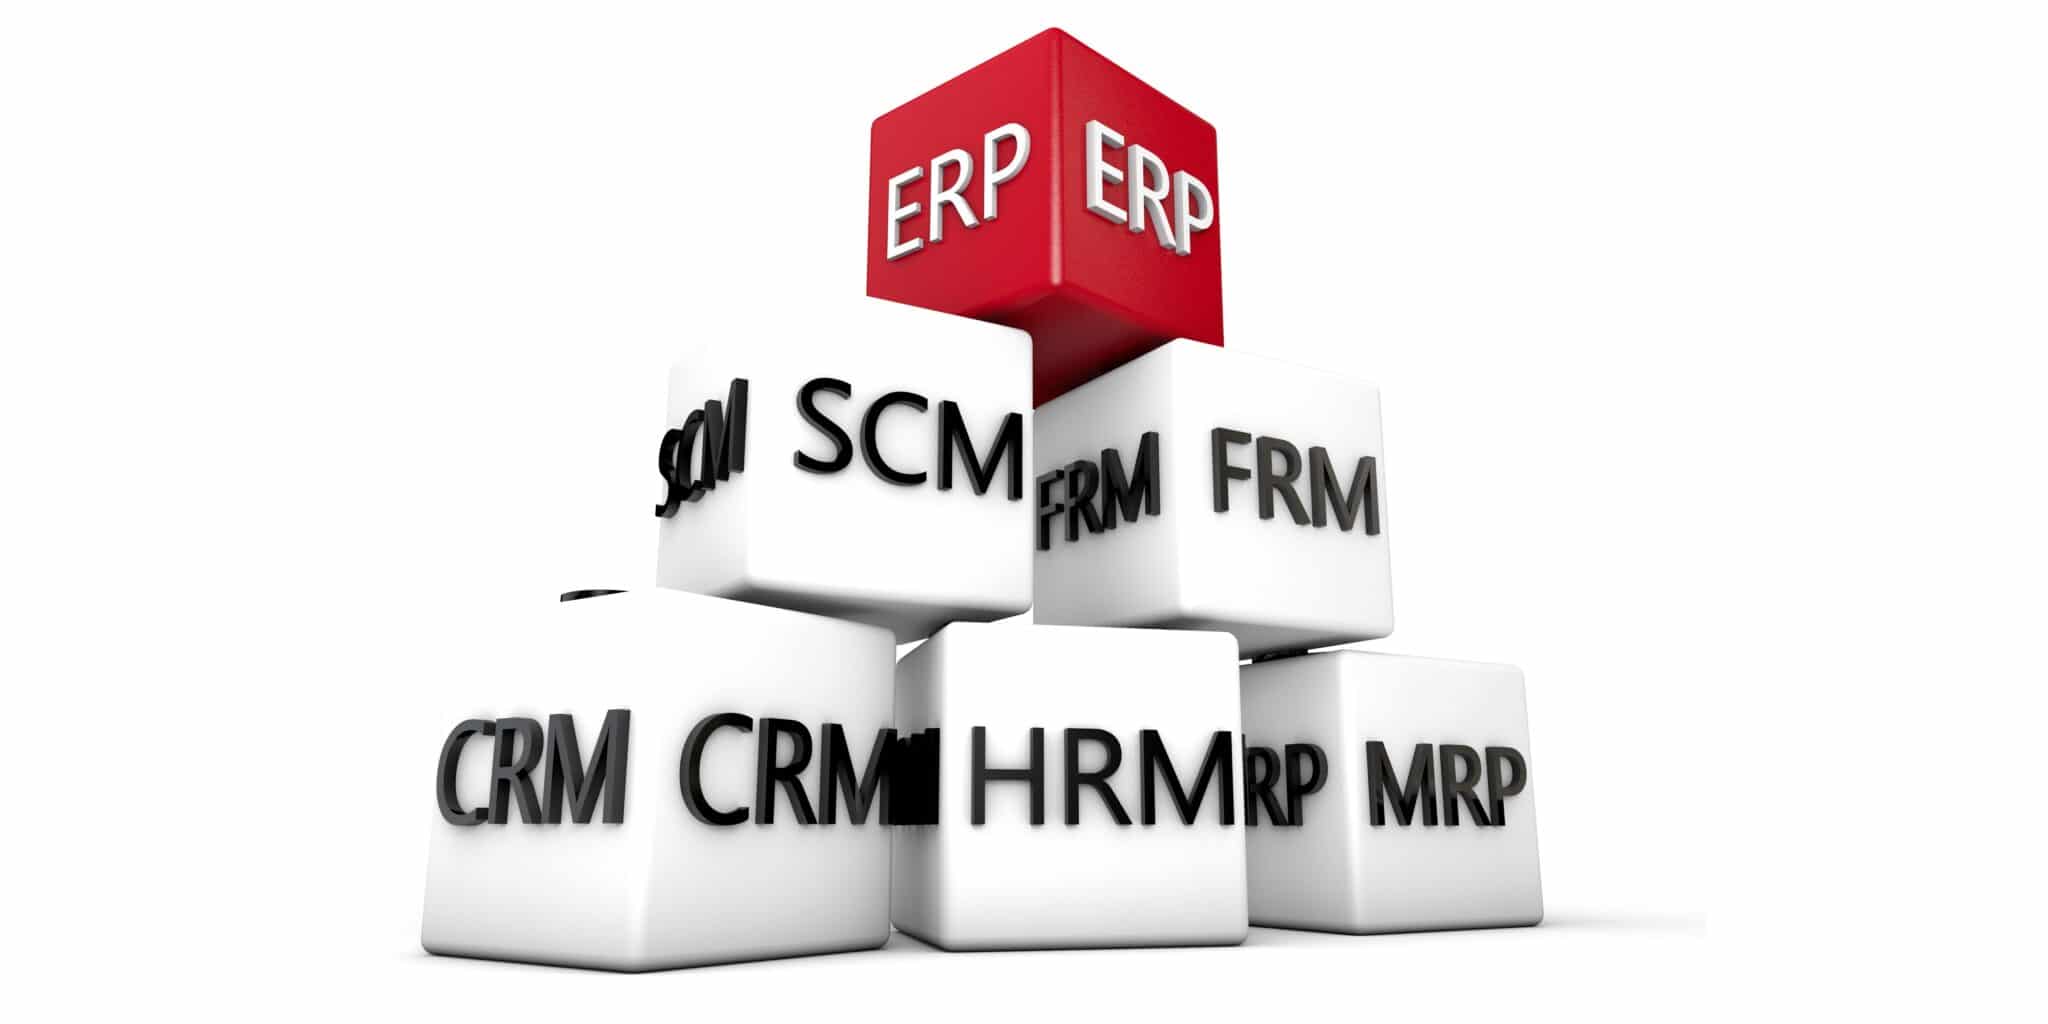 The features of ERP system procurement